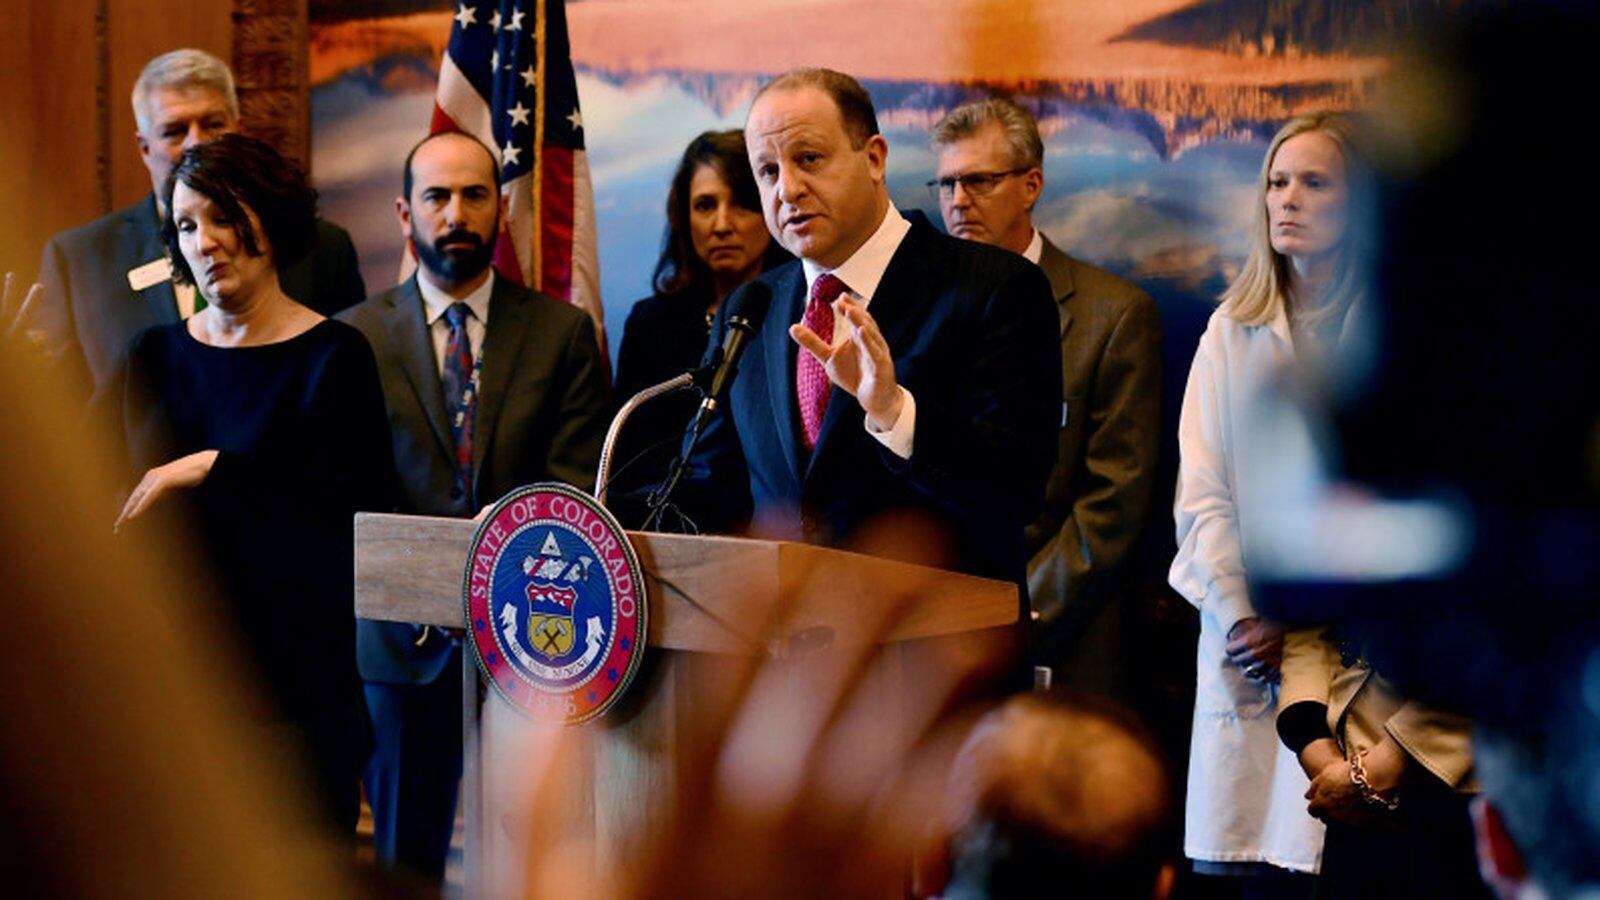 Colorado Governor Jared Polis speaks at a State of Colorado podium, surrounded by several people.